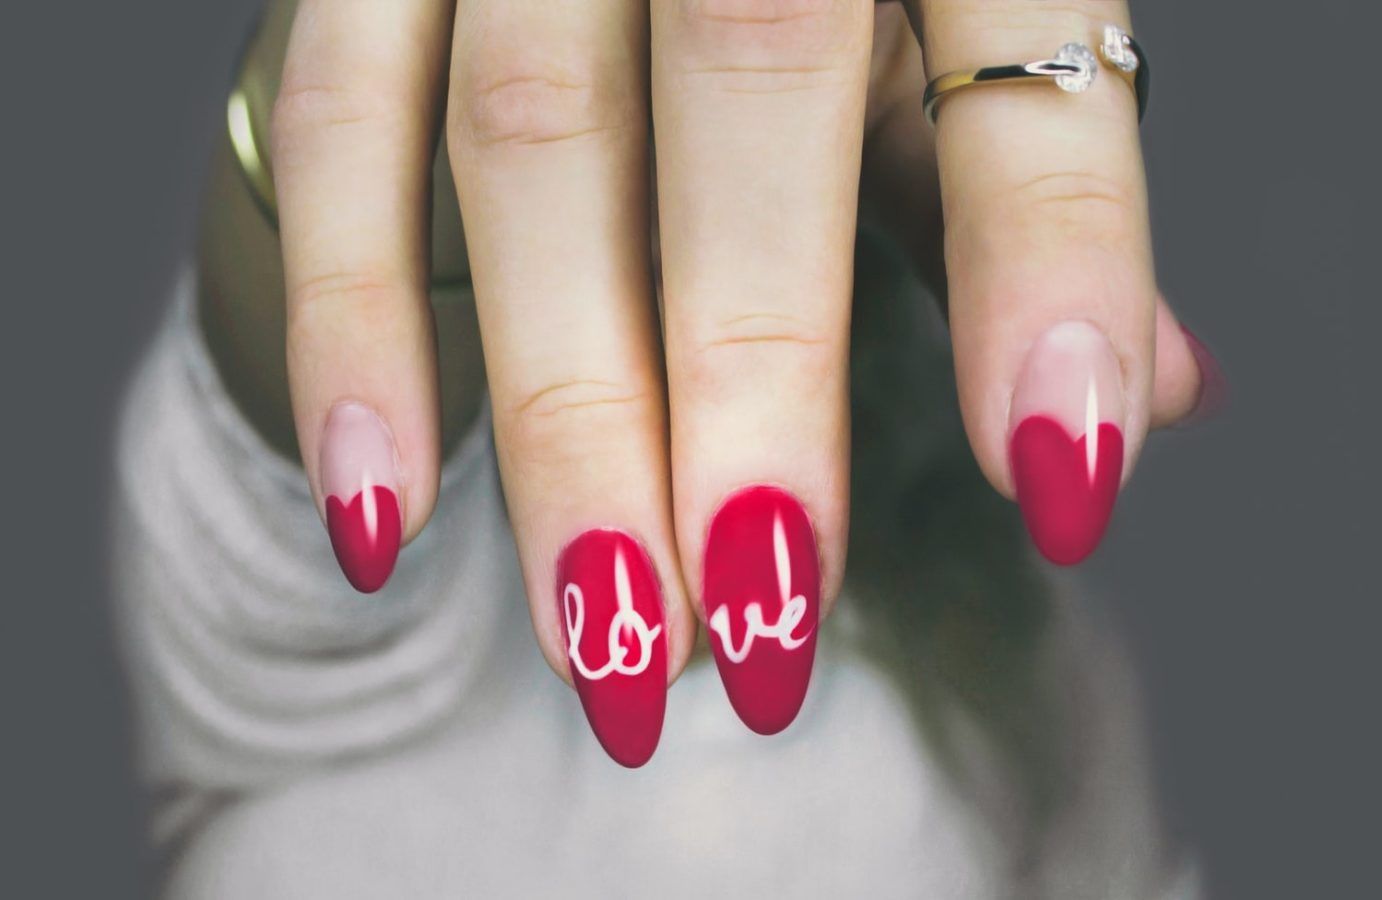 Nails before males: 10 nail art ideas for Valentine’s Day 2021